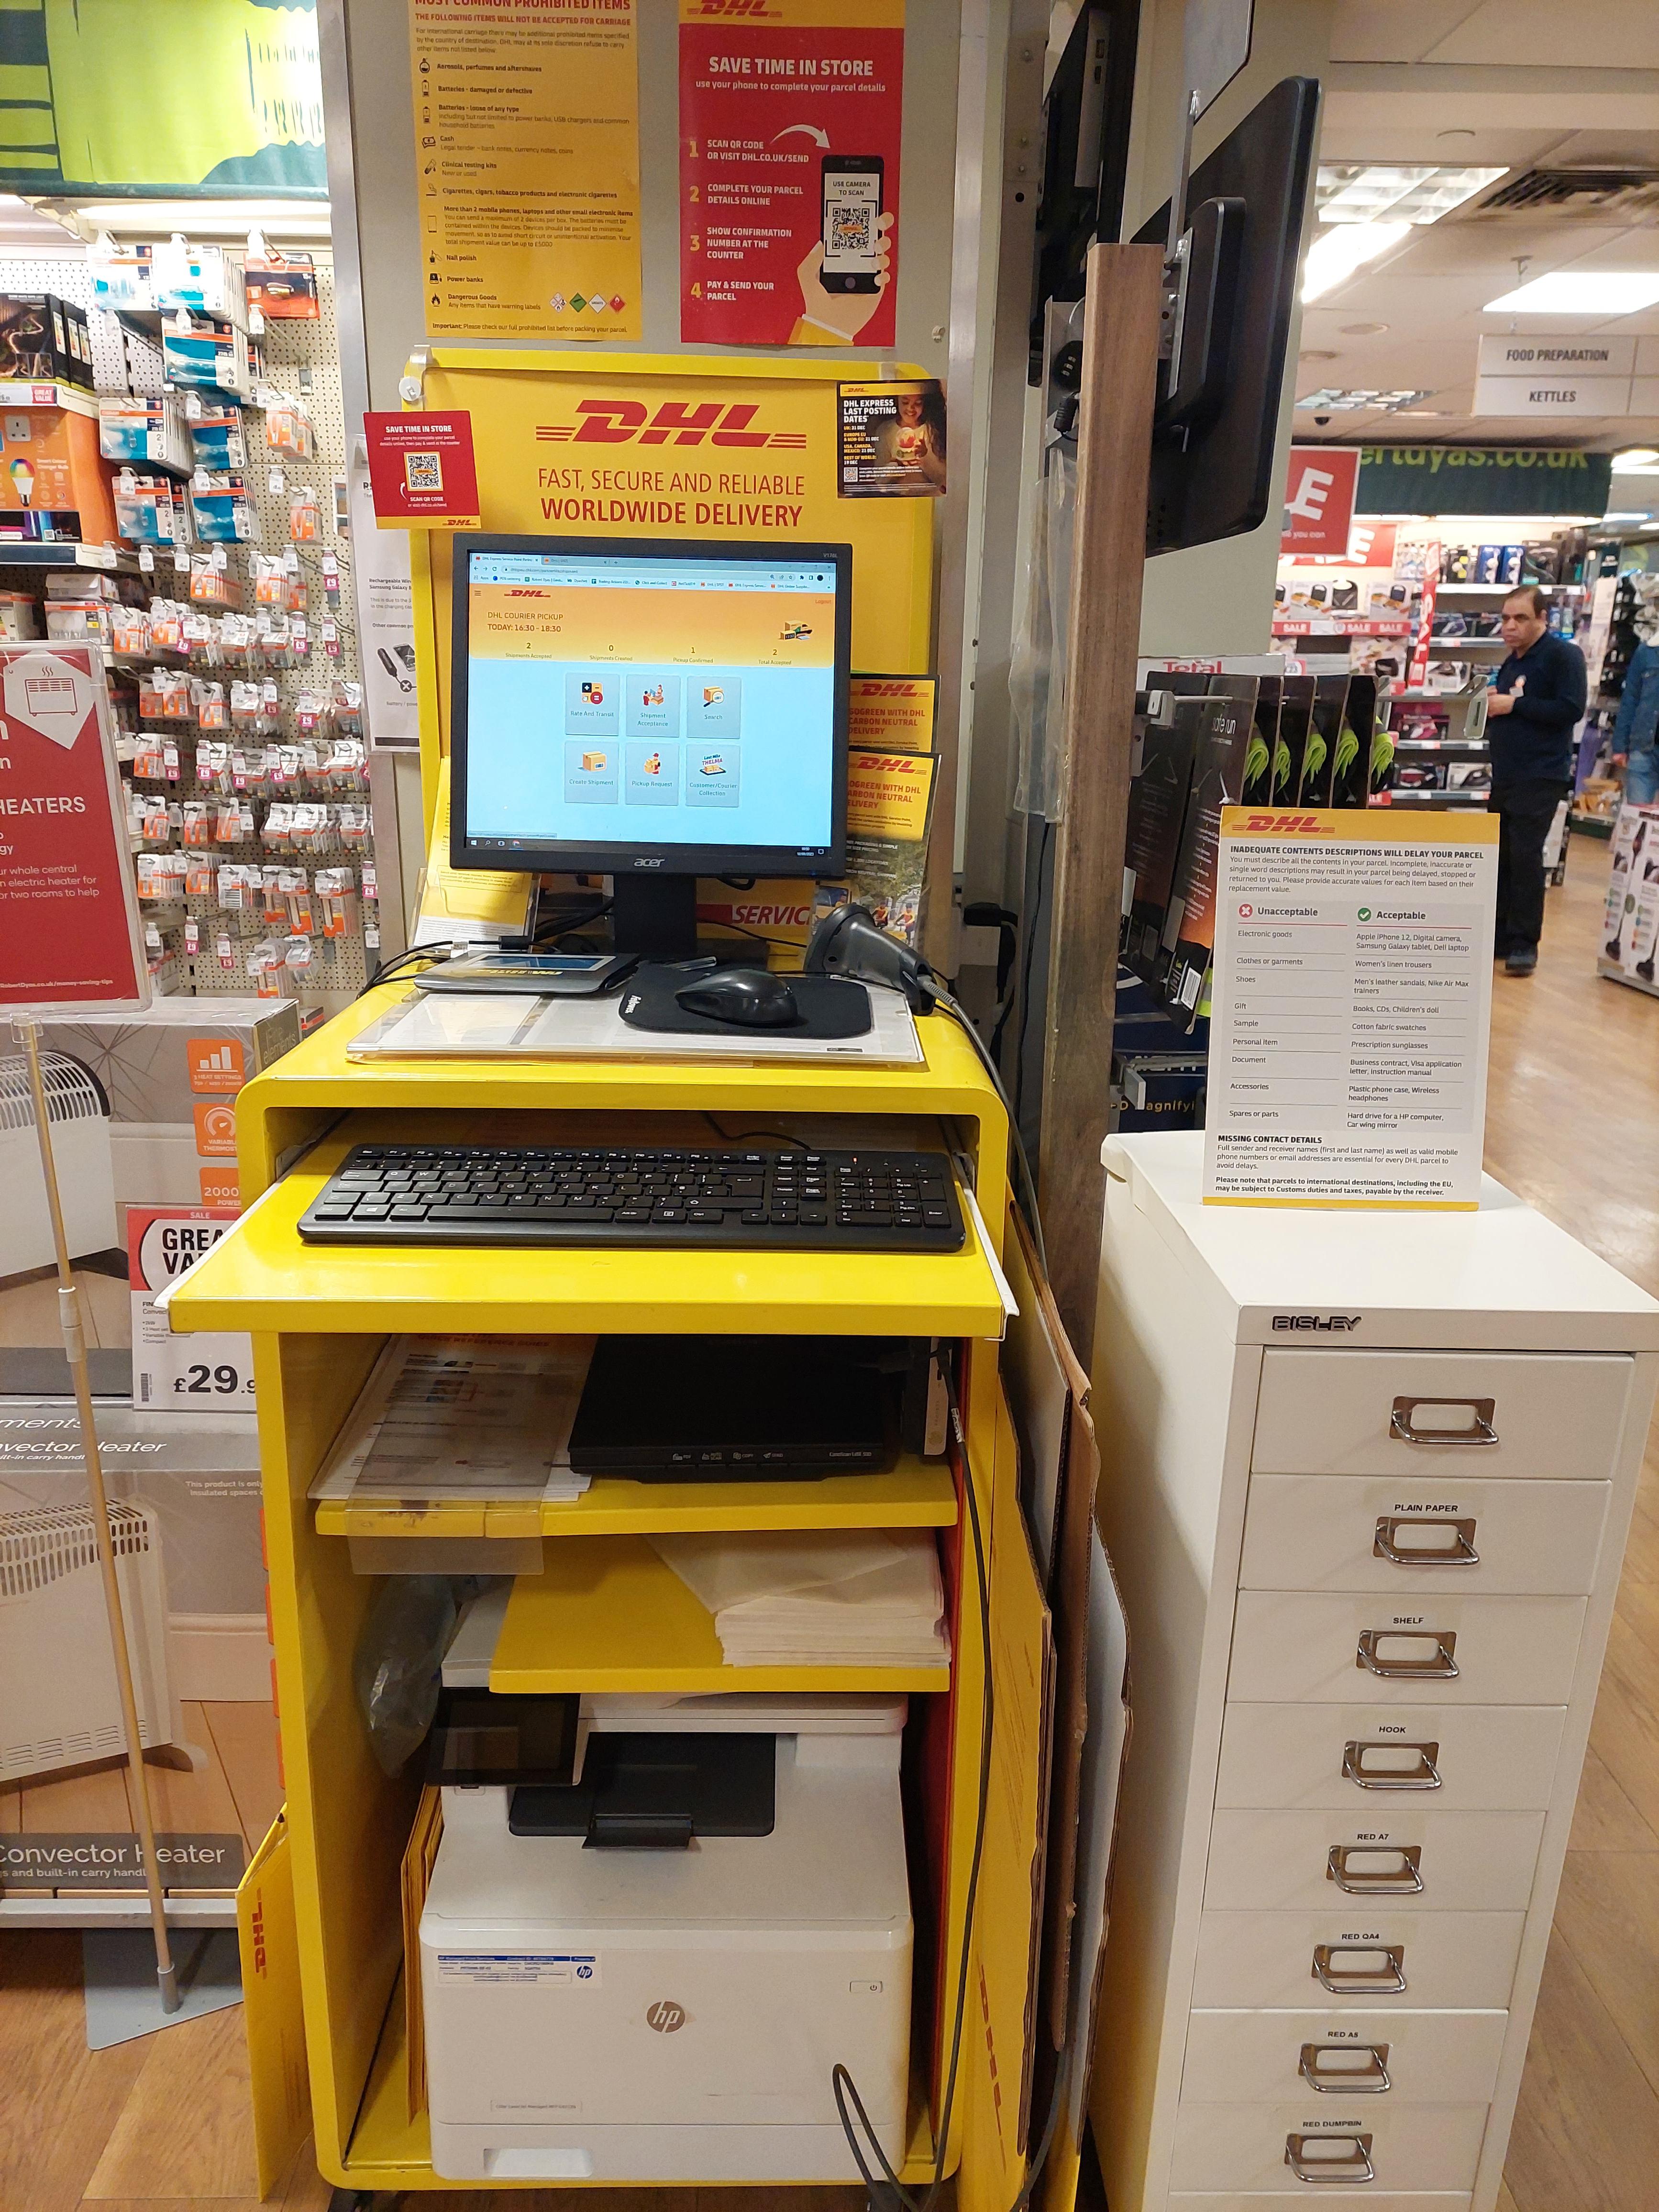 Images DHL Express Service Point (Robert Dyas Canary Wharf)